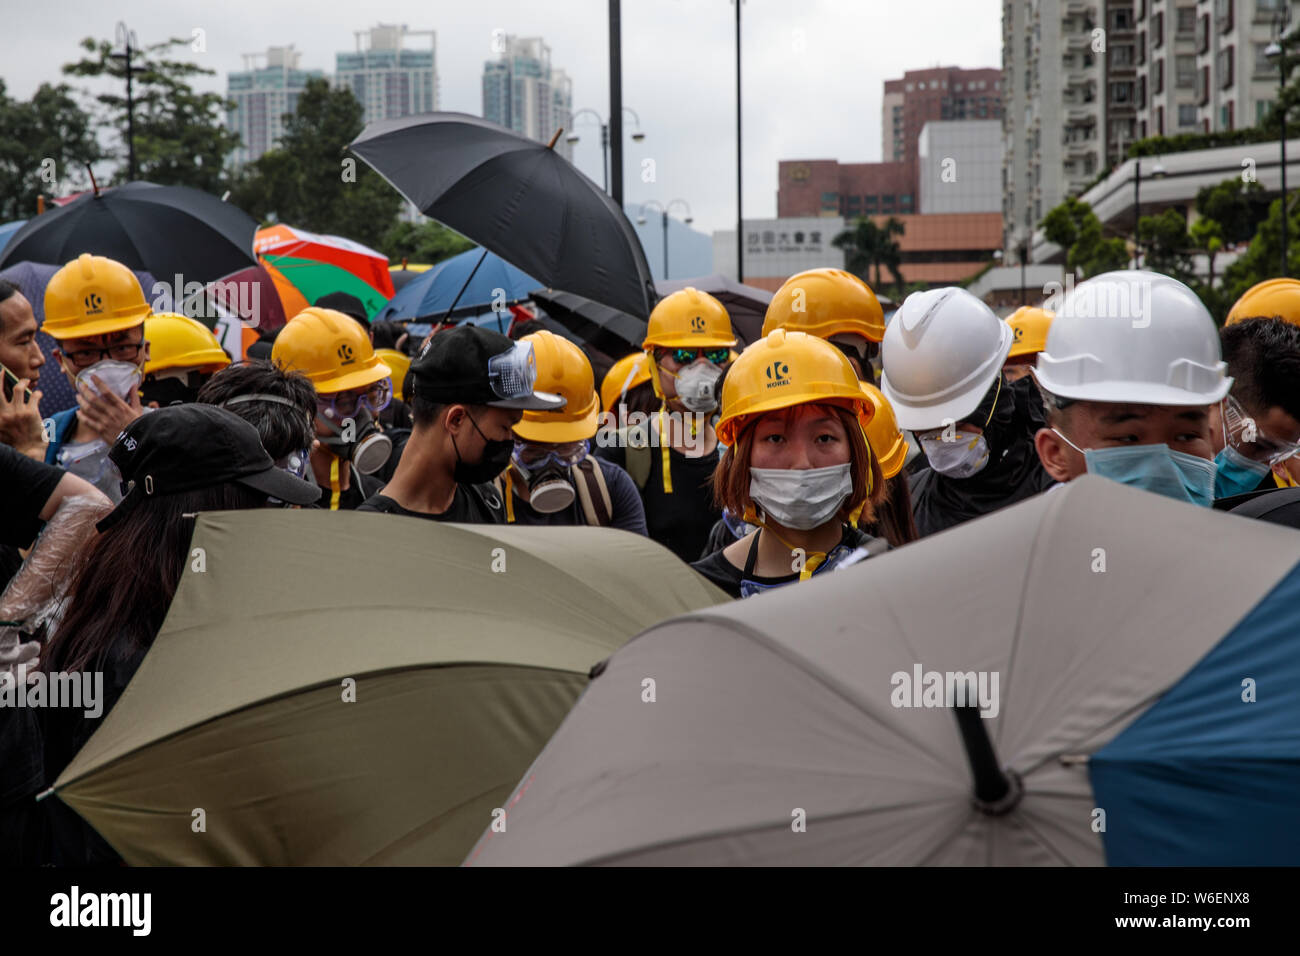 Protesters gather with umbrellas and hard hats during anti-extradition bill demonstrations in Sha Tin, Hong Kong on the 14th of July 2019. Pro-democracy protesters continue with demonstrations as they call for the complete withdrawal of a controversial extradition bill and the resignation of Hong Kong Chief Executive Carrie Lam. Stock Photo